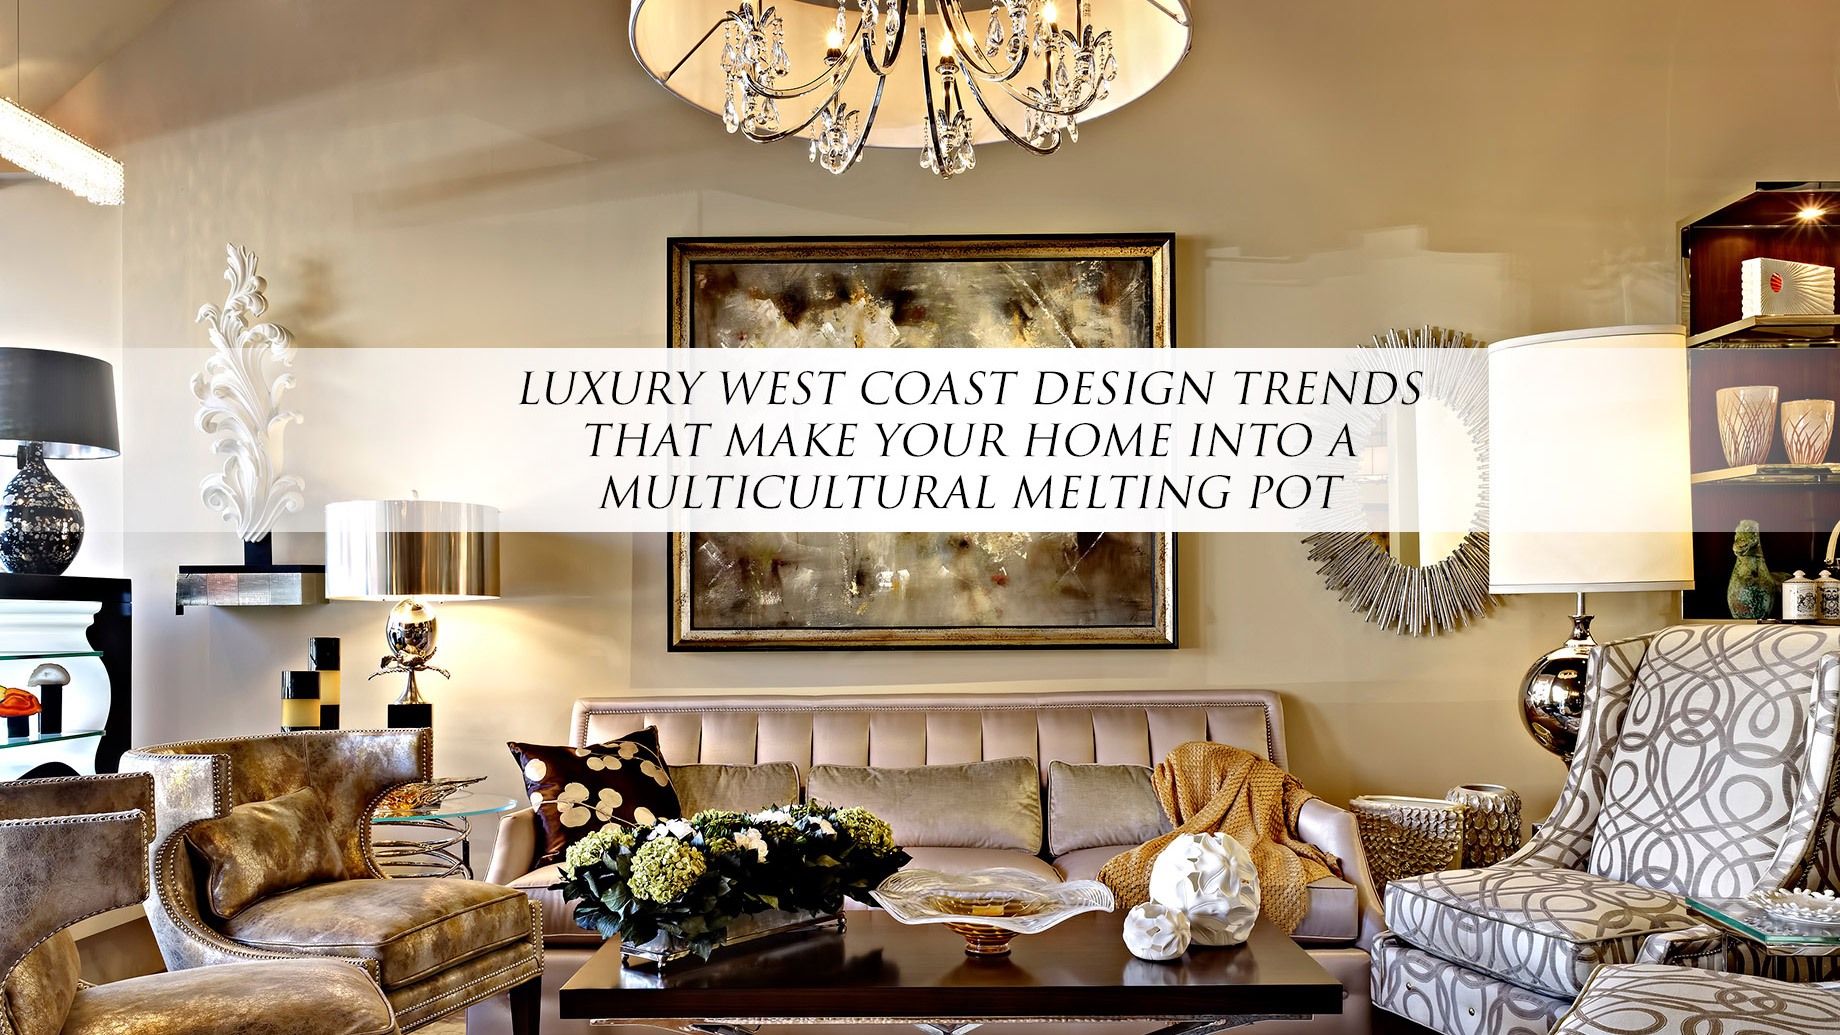 Luxury West Coast Design Trends that Make Your Home Into a Multicultural Melting Pot